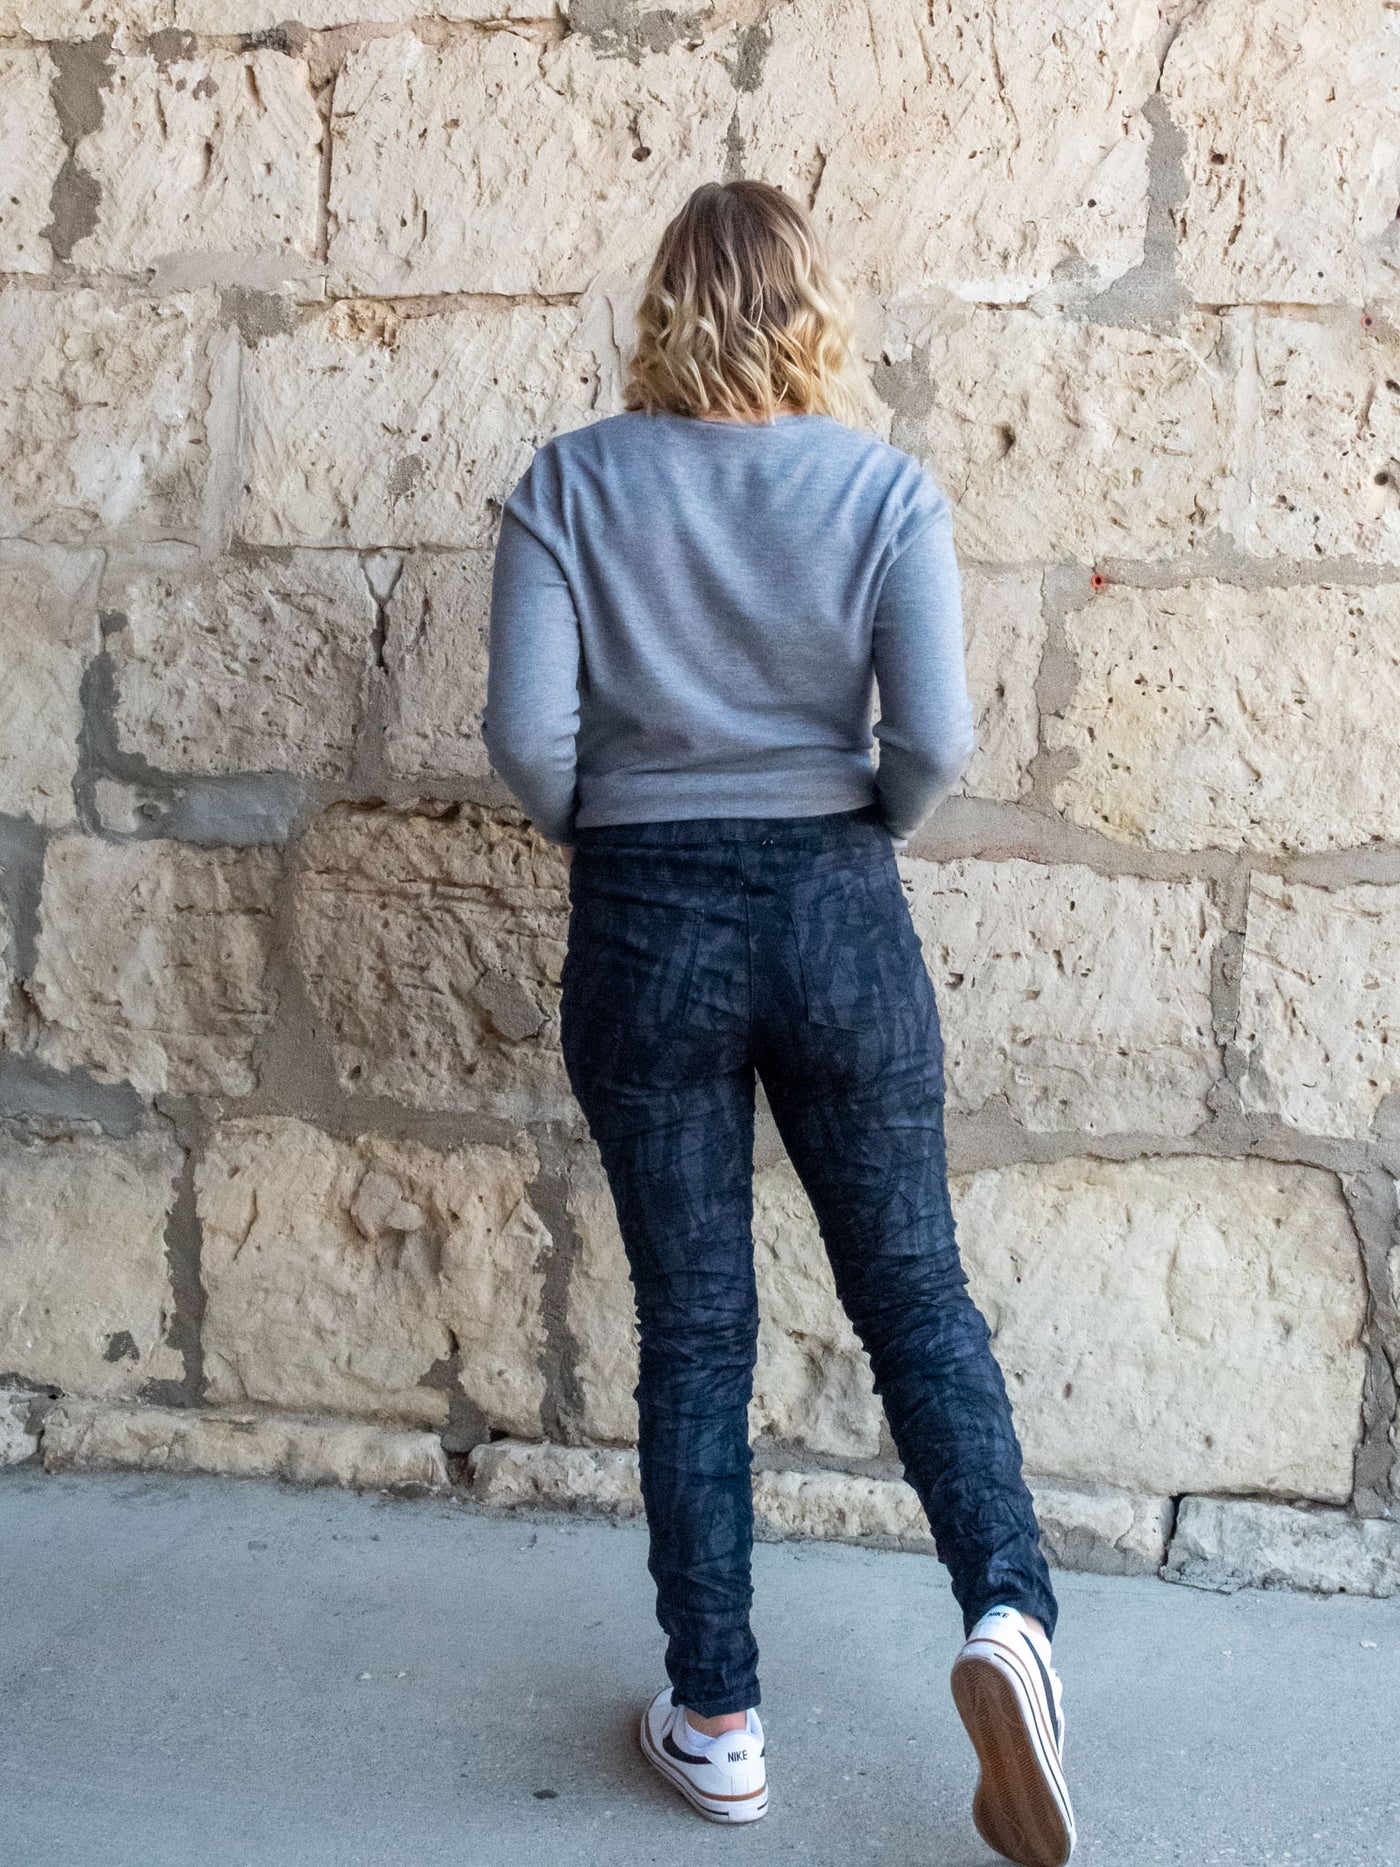 A model wearing a pair of navy, printed pants with a crinkle fabric. The model has them paired with a gray v-neck top and white sneakers.